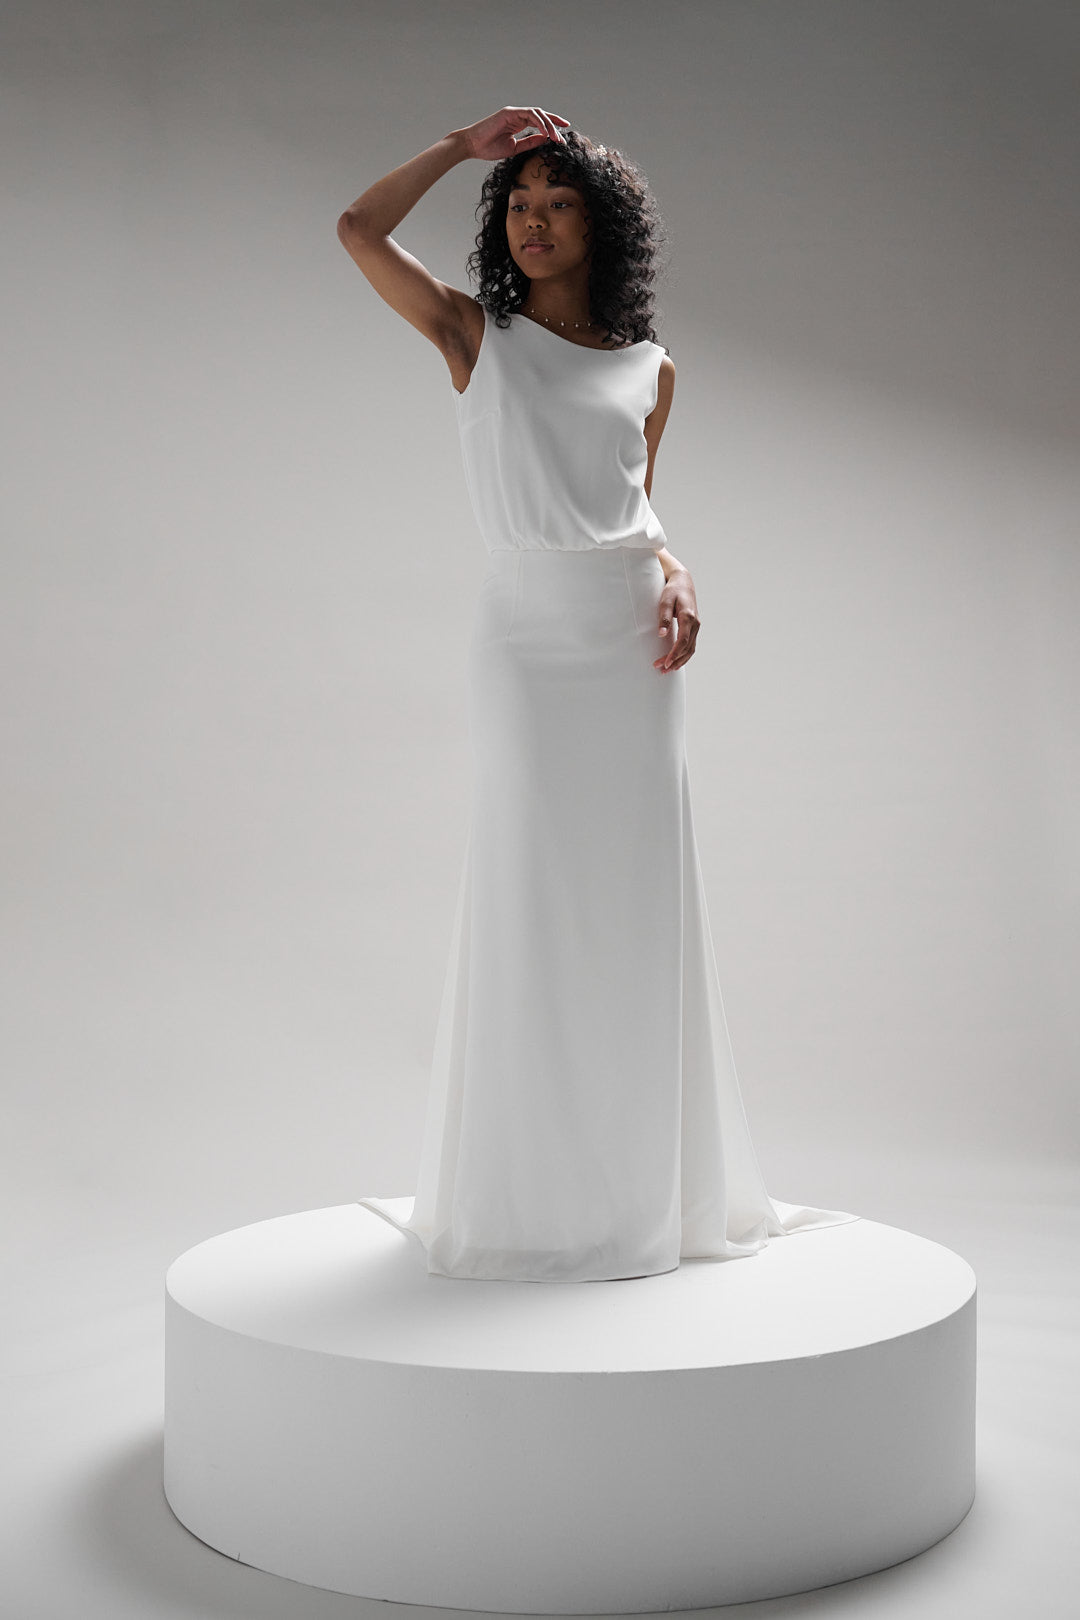 Gaube dress features low back and bodice that drapes gently across the bust, meeting a high snug waistline for an elegant silhouette. 